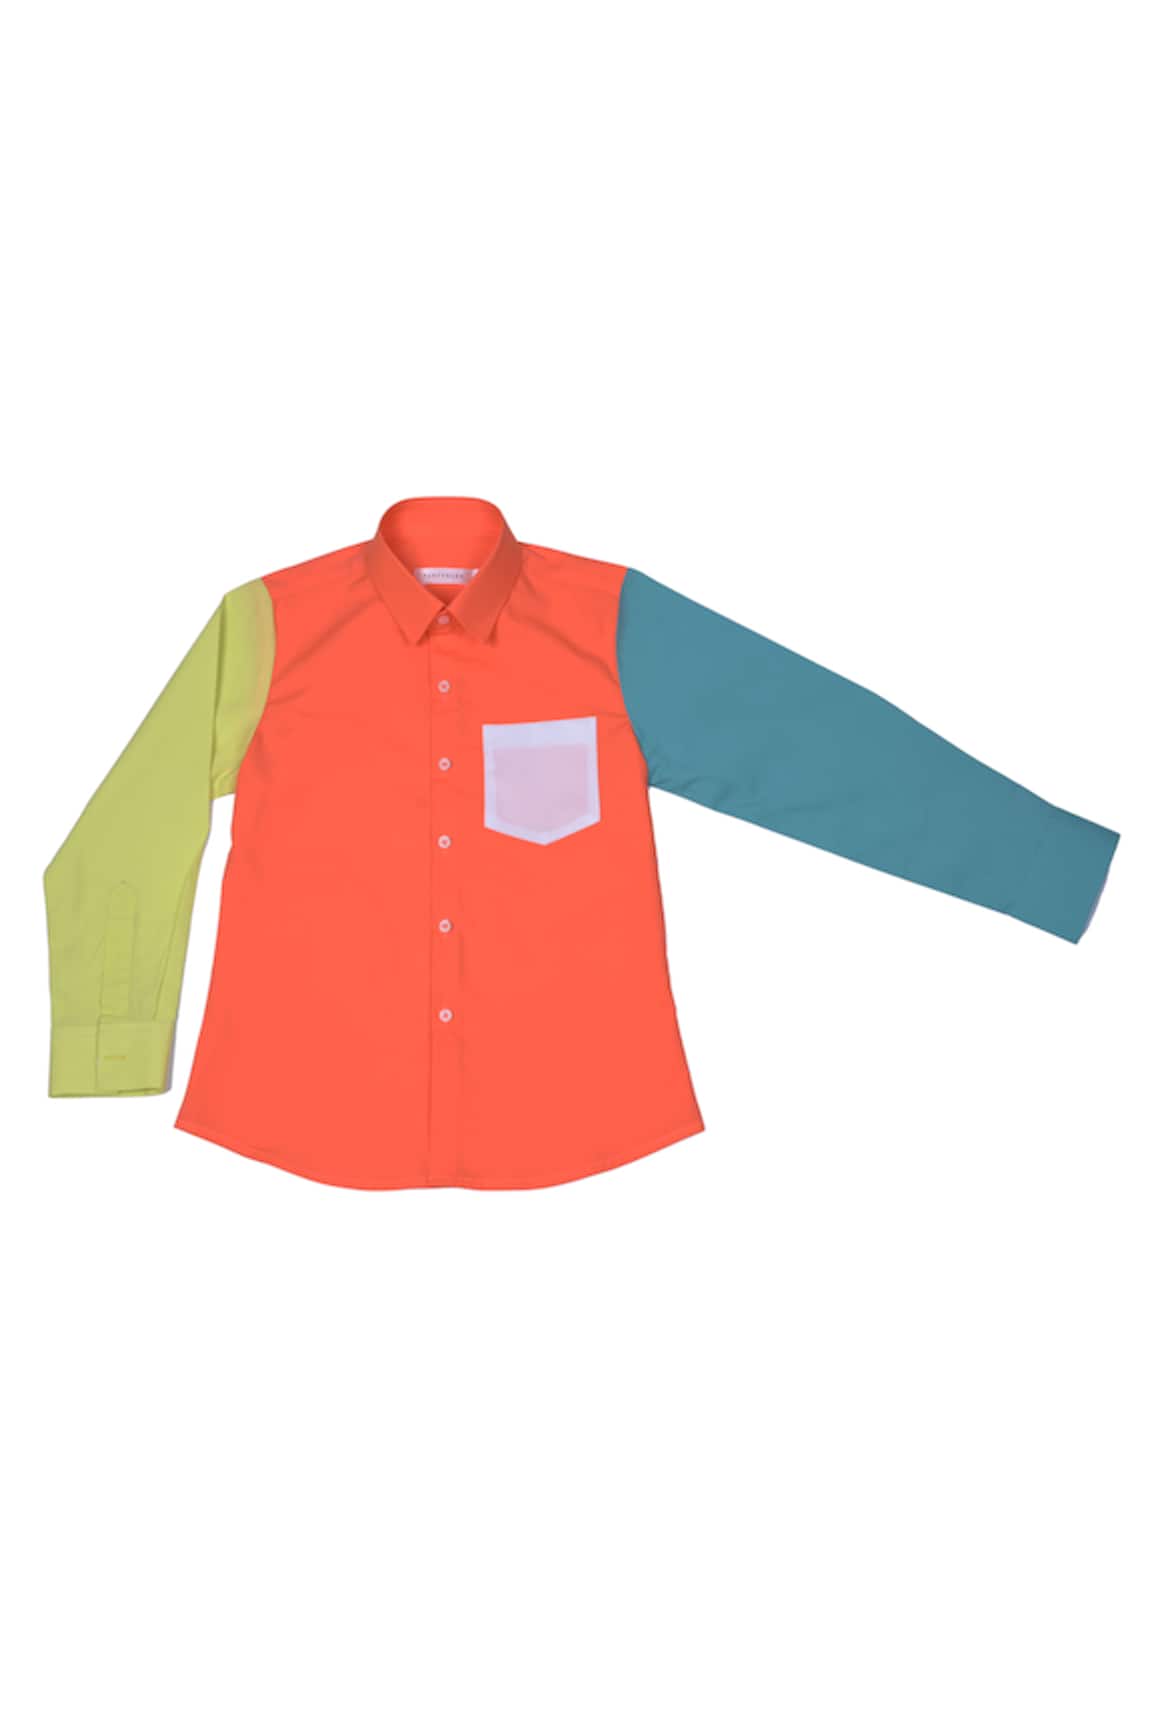 Partykles Colorblock Full Sleeve Shirt